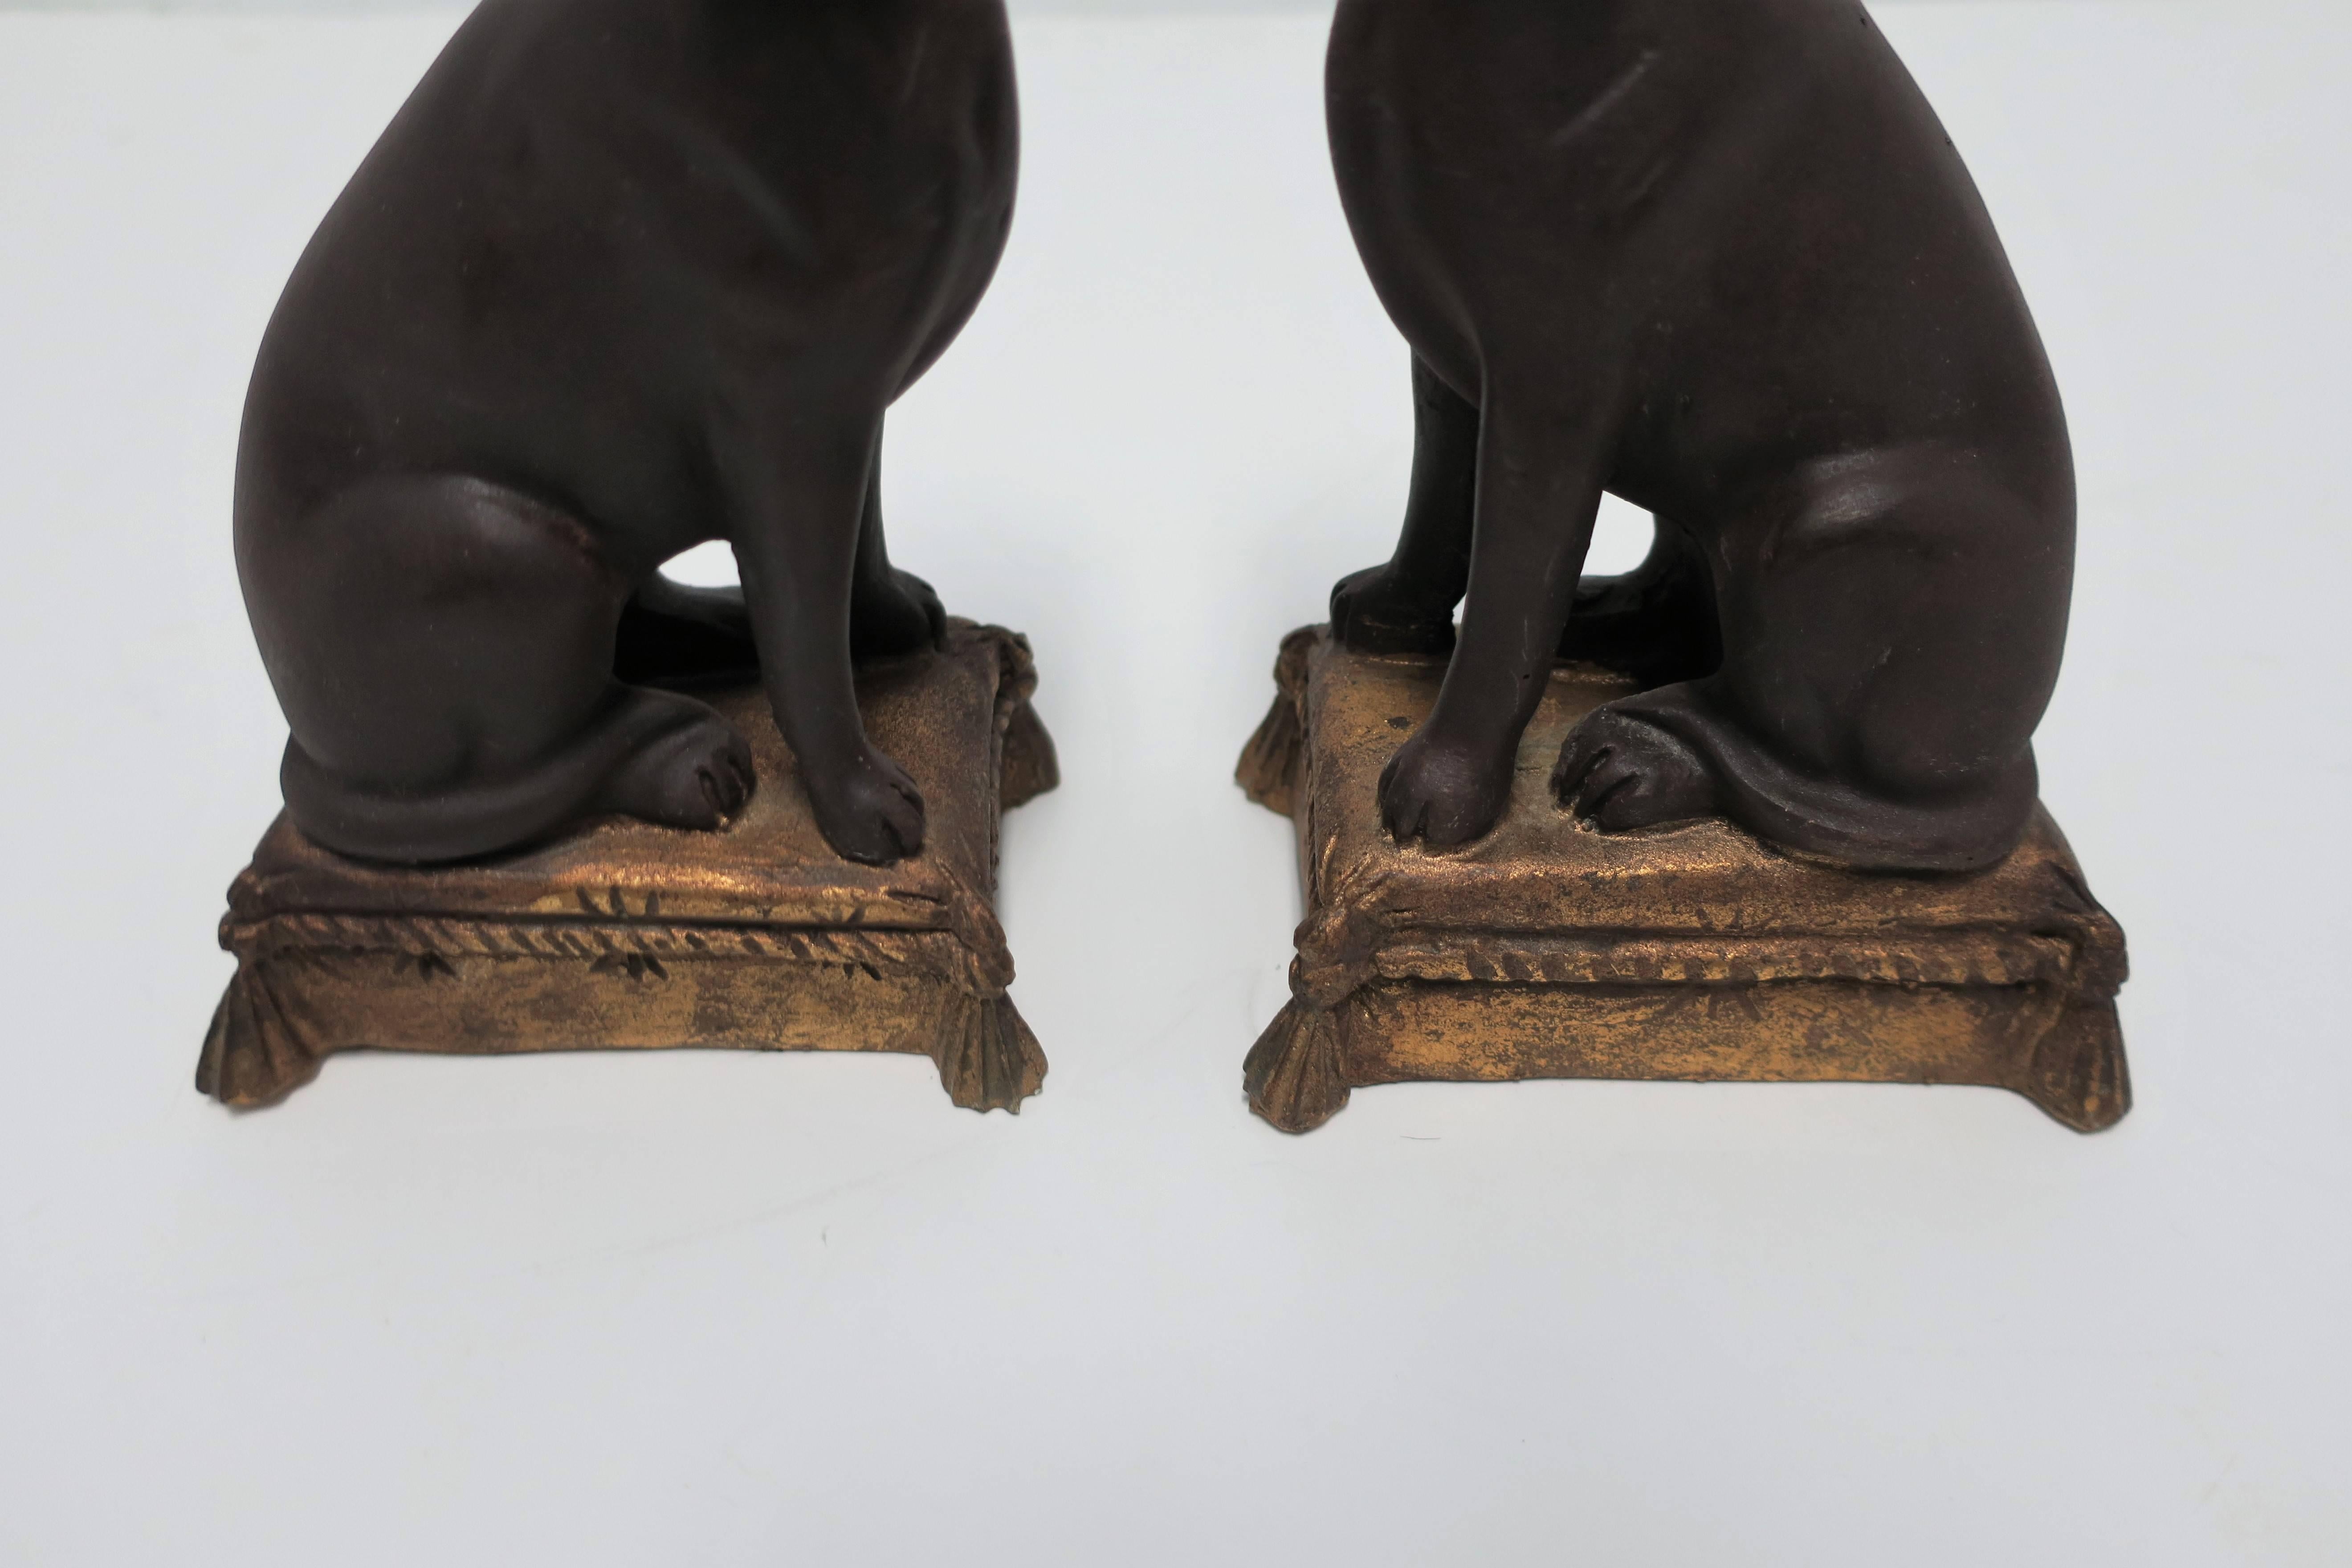 Plaster Vintage Pair of Retriever Dog Bookends